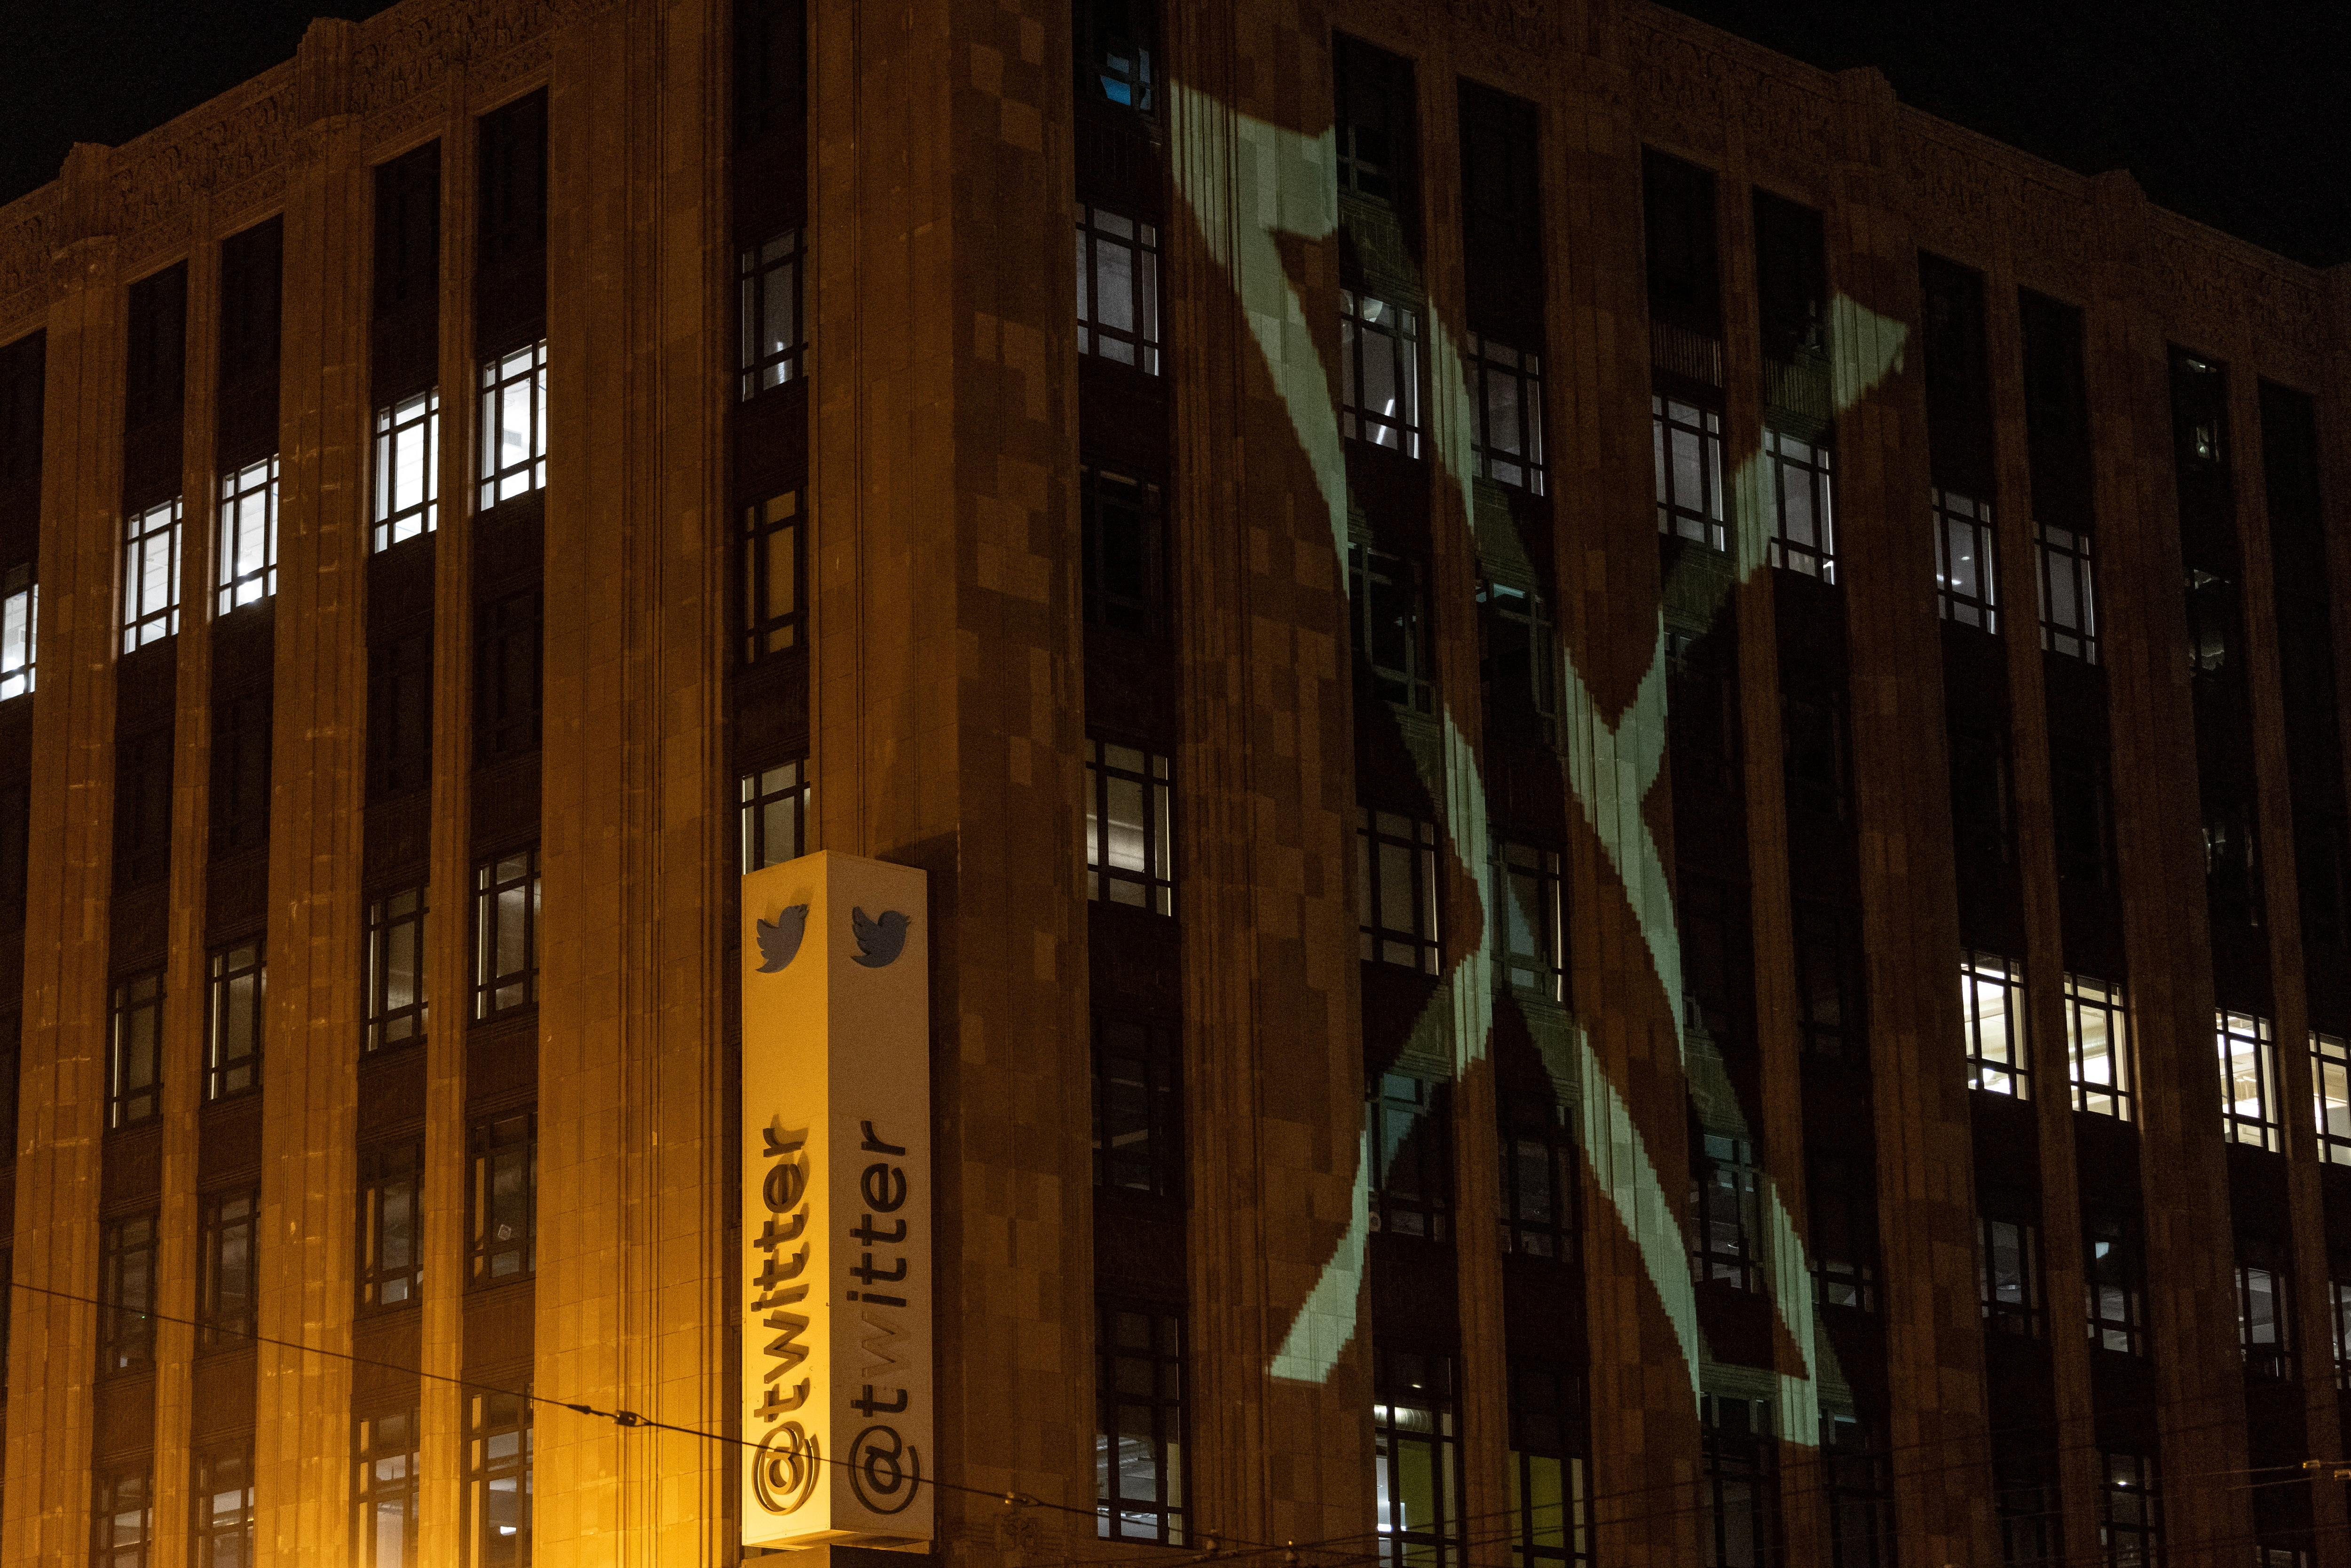 Twitter's new logo is seen projected on the corporate headquarters building in downtown San Francisco, California